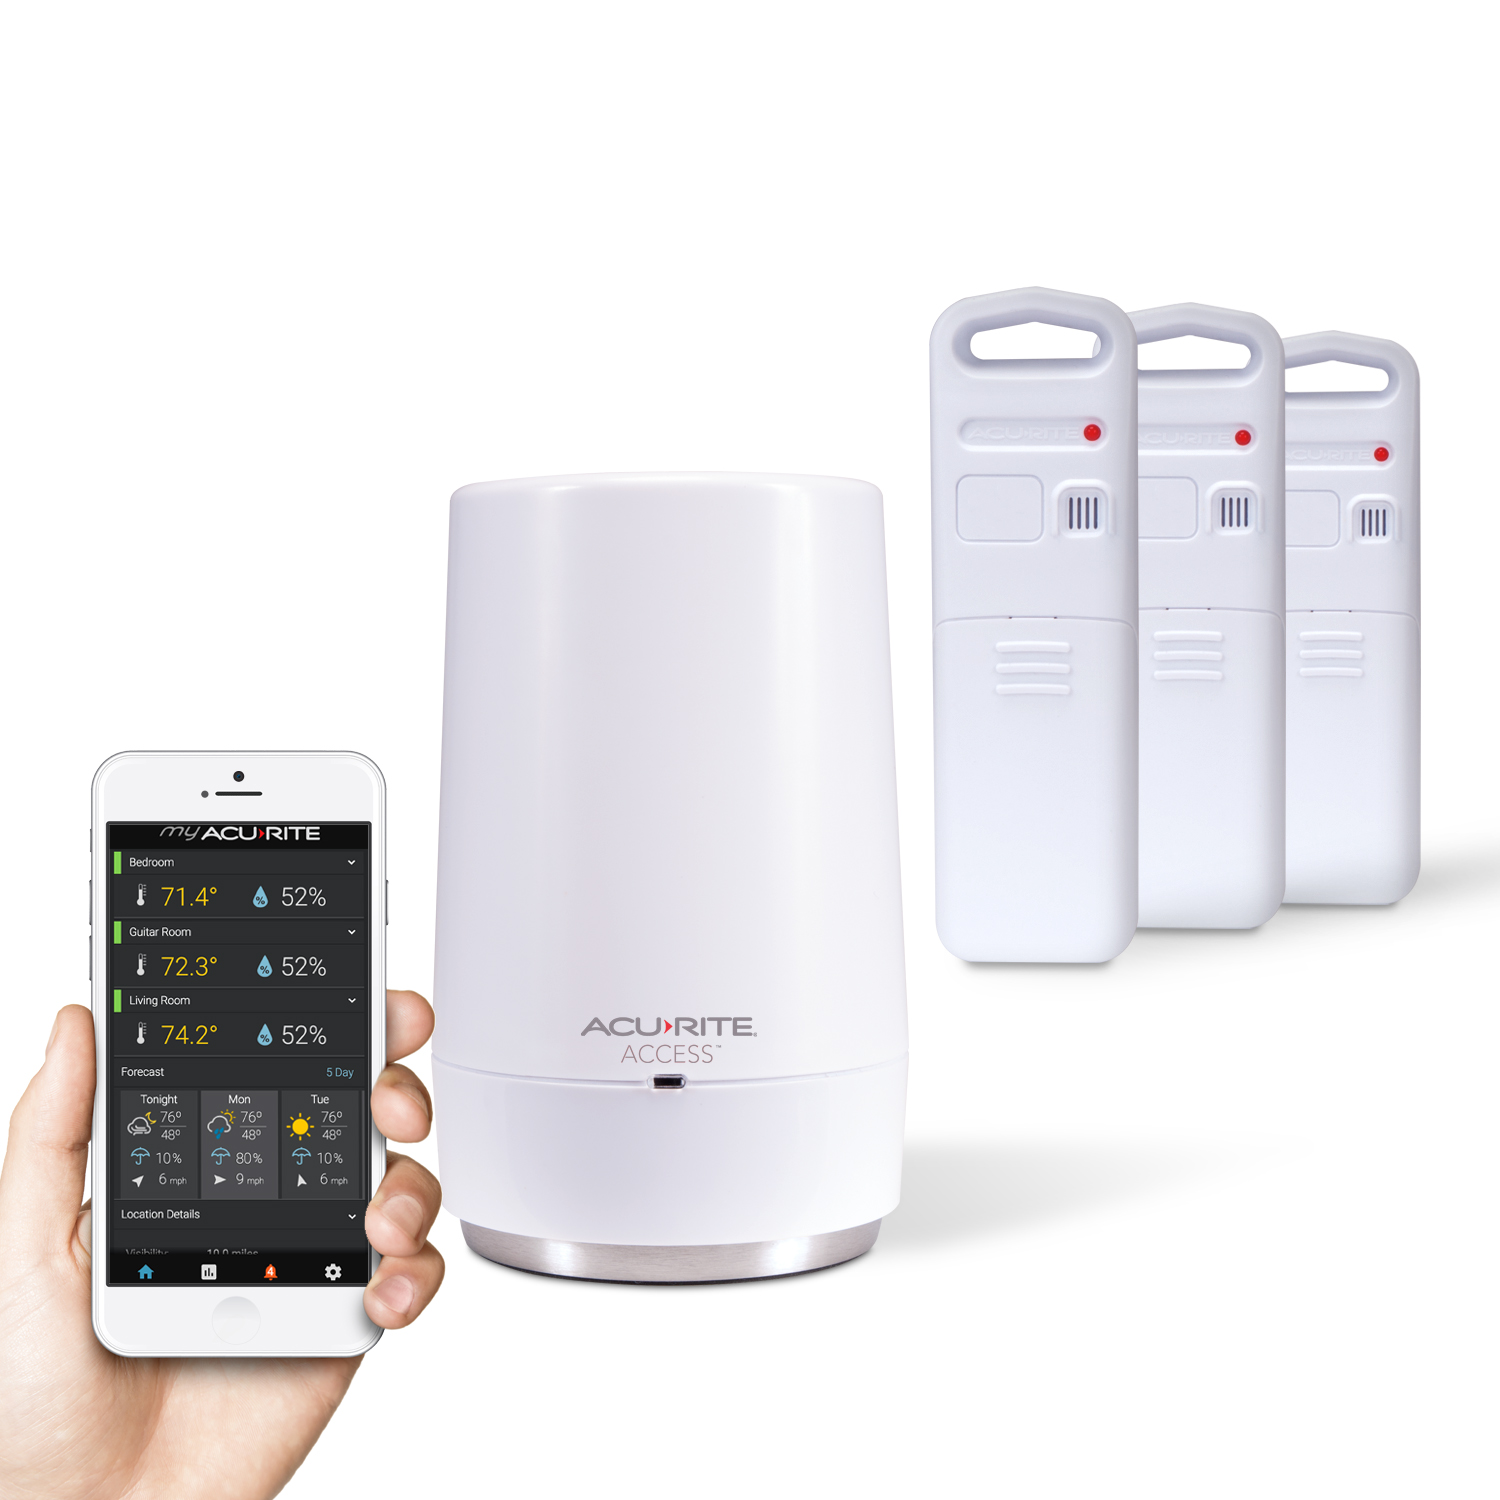 AcuRite remote monitoring for your home